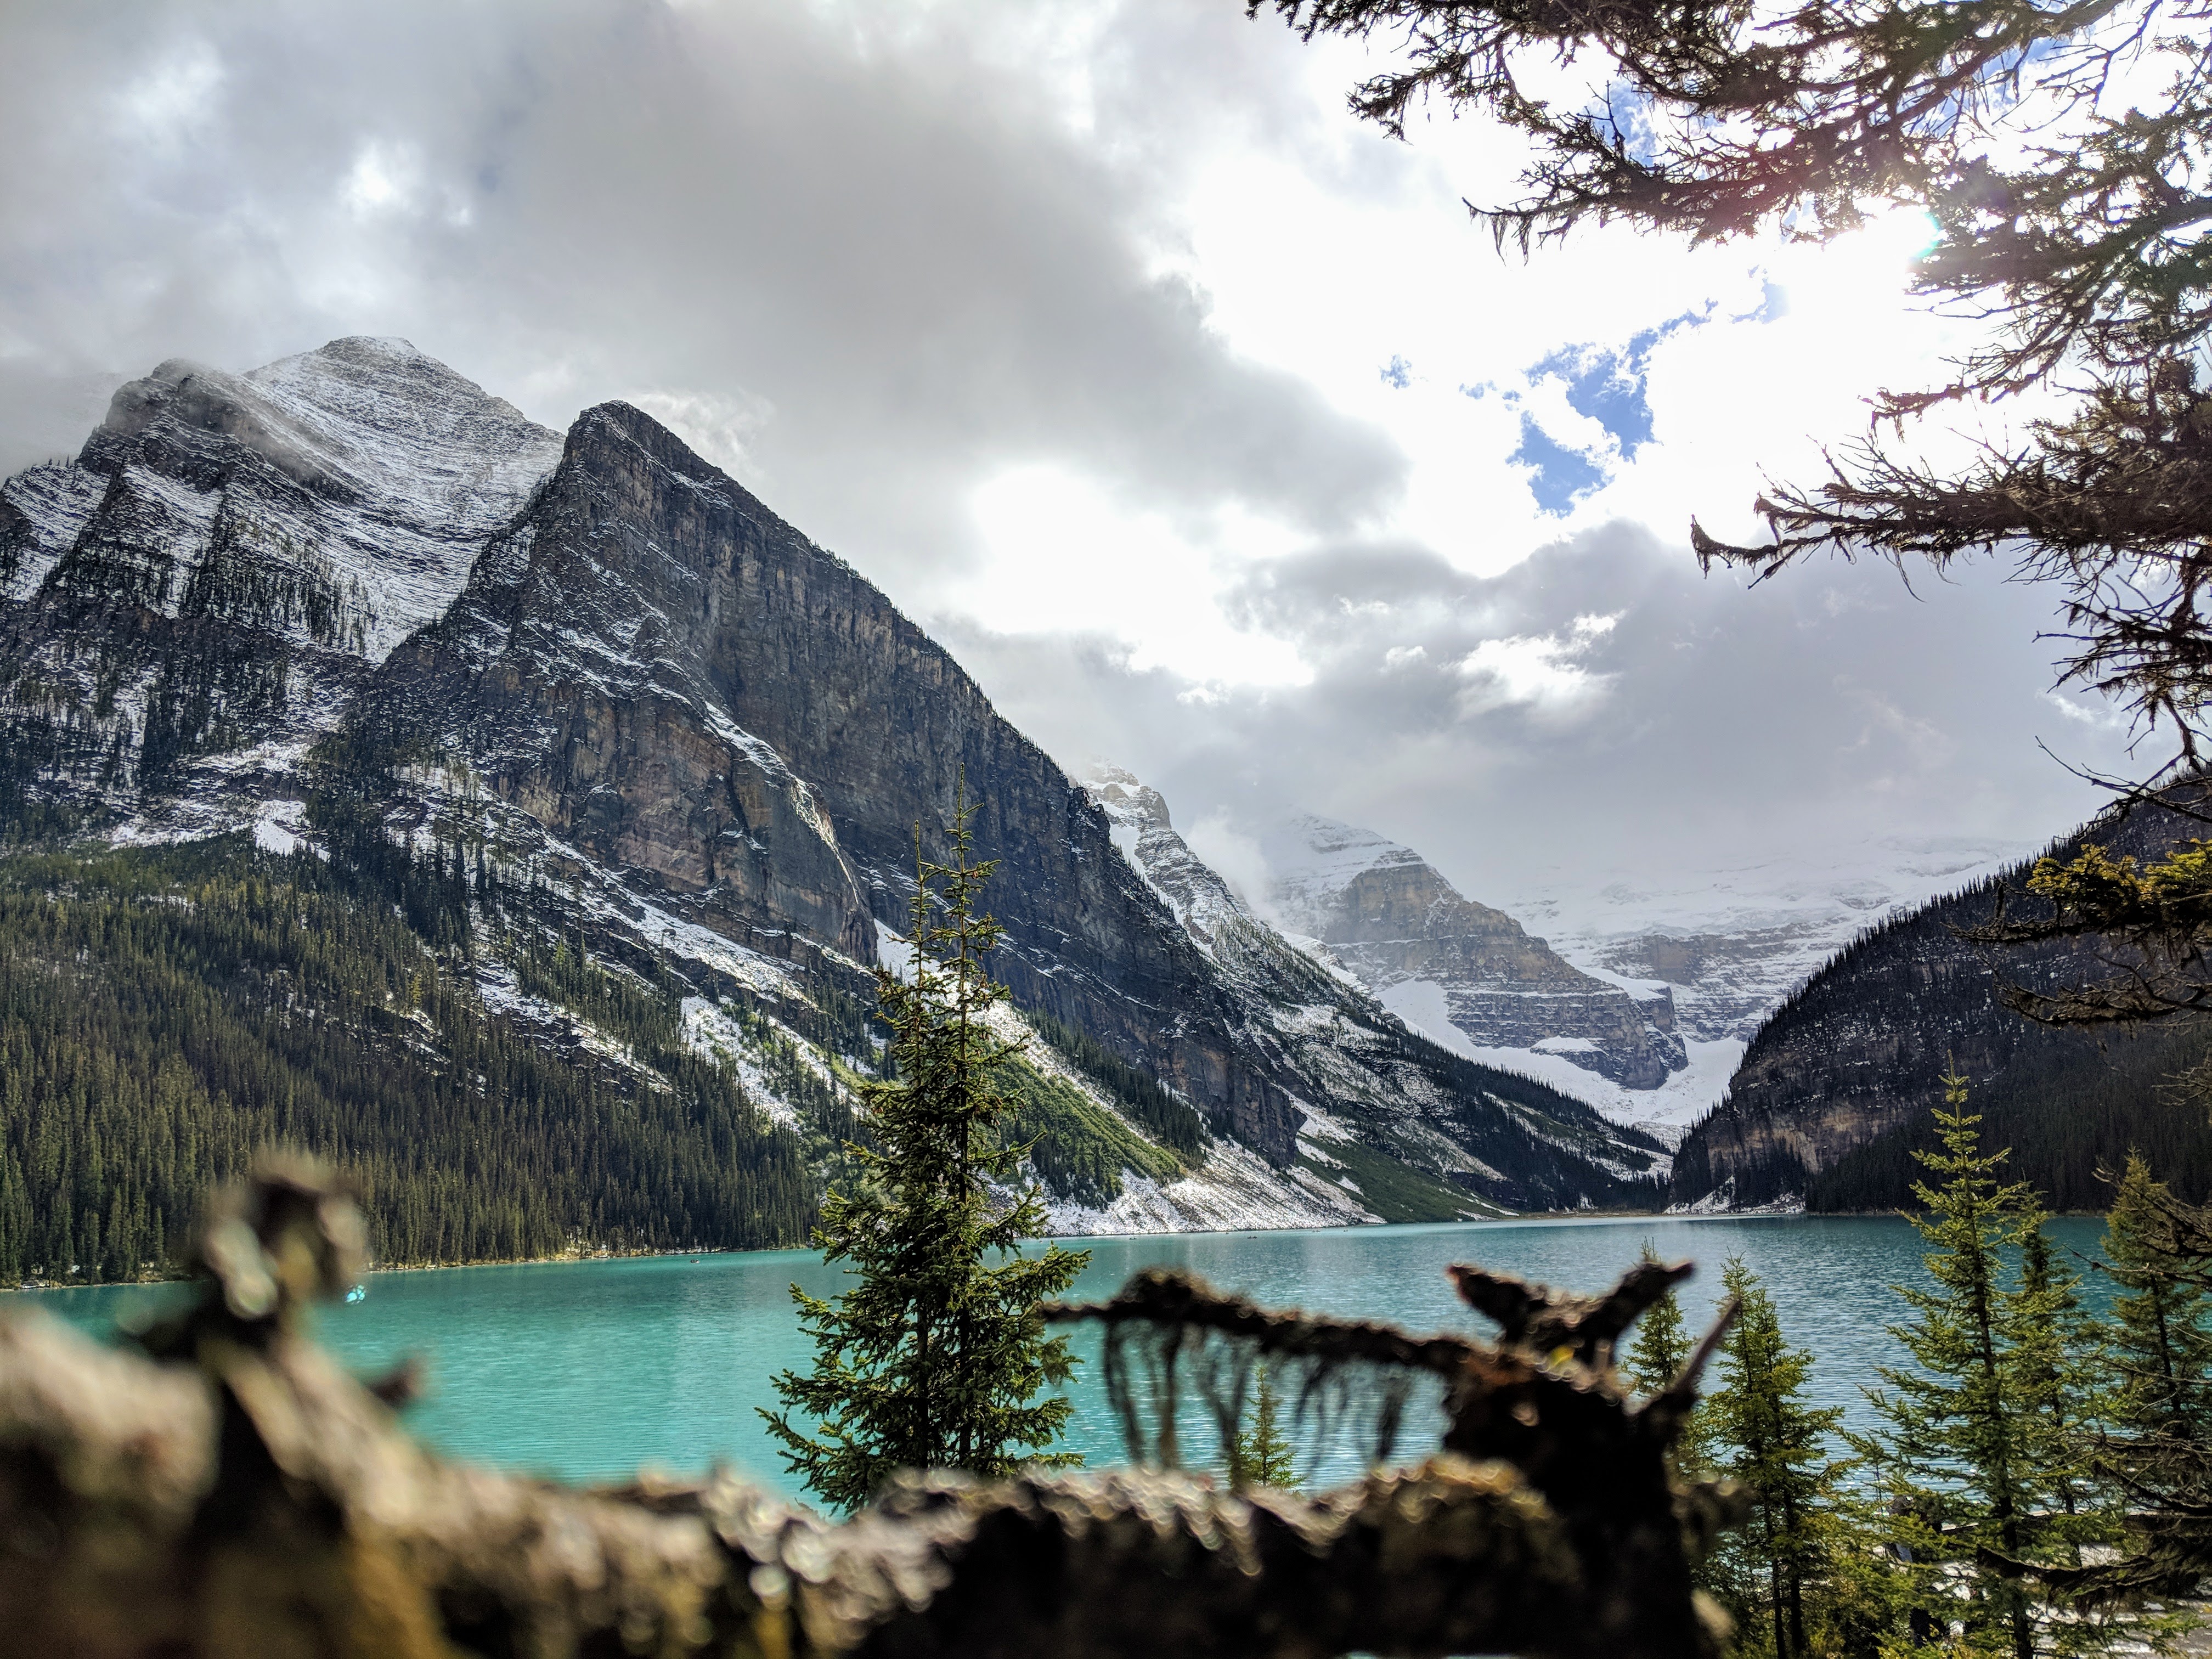 A picture peeking out over a branch at the snow-capped mountains around Lake Louise.